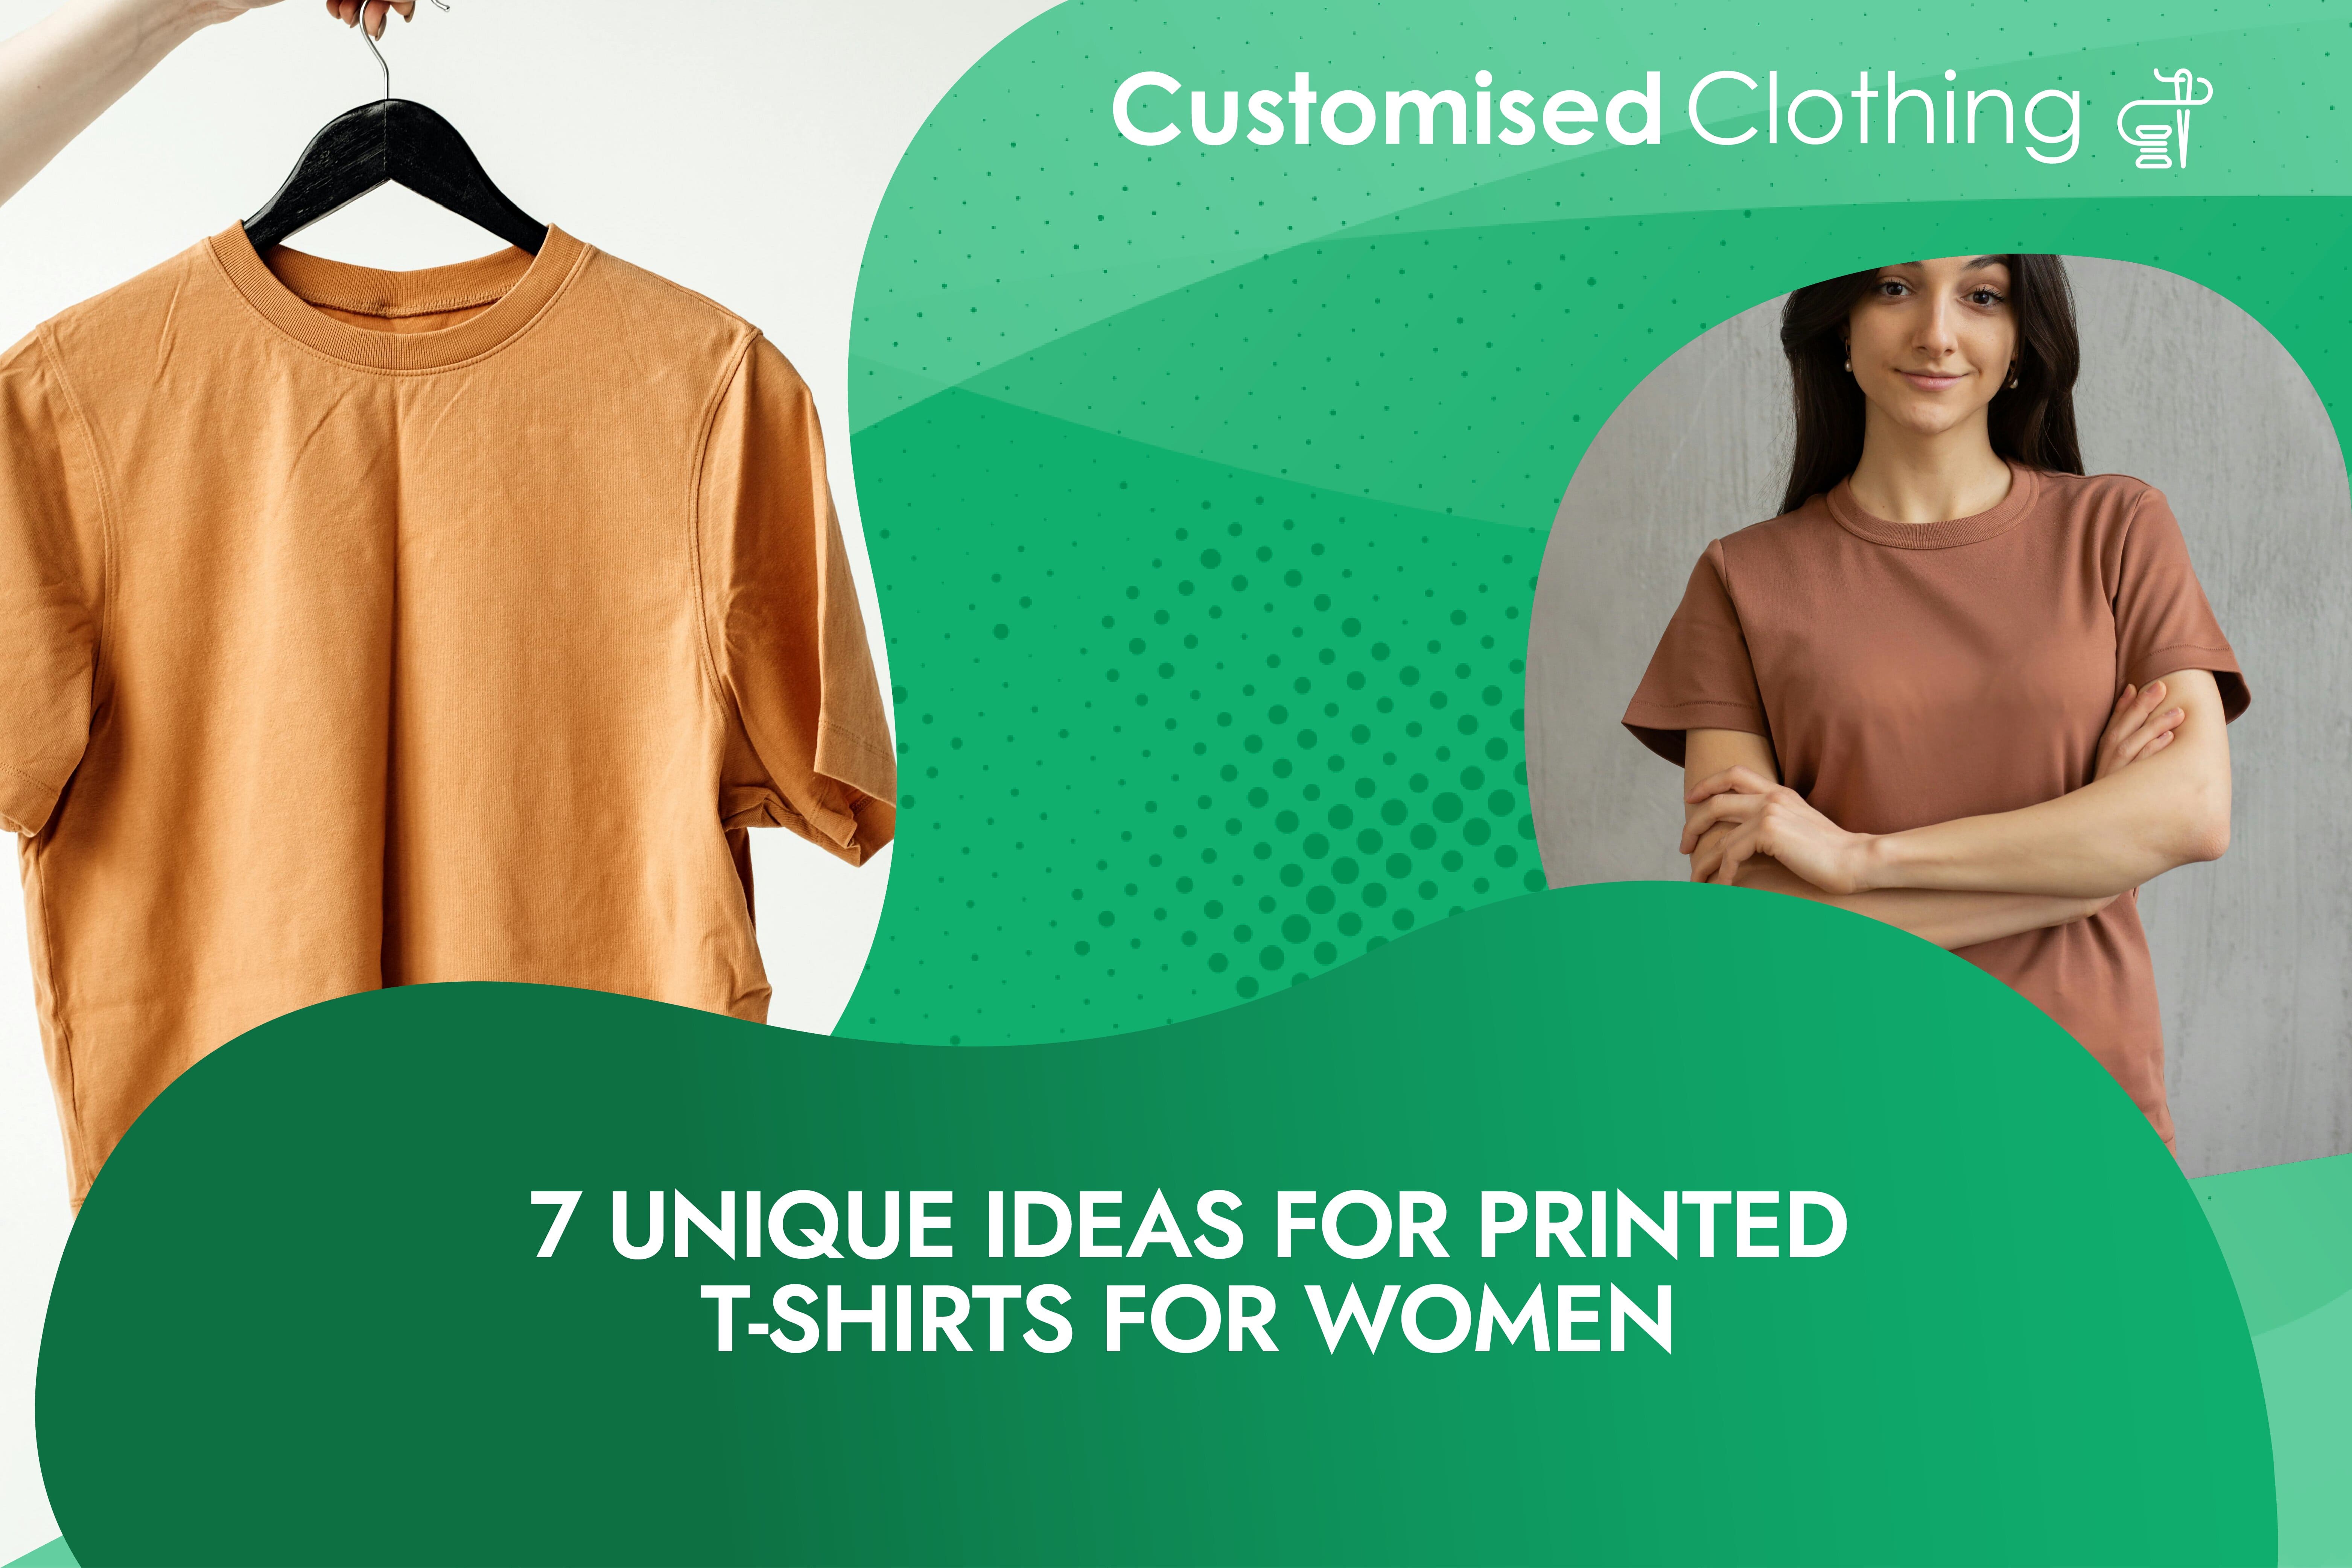 7 Unique Ideas For Printed T-shirts for Women